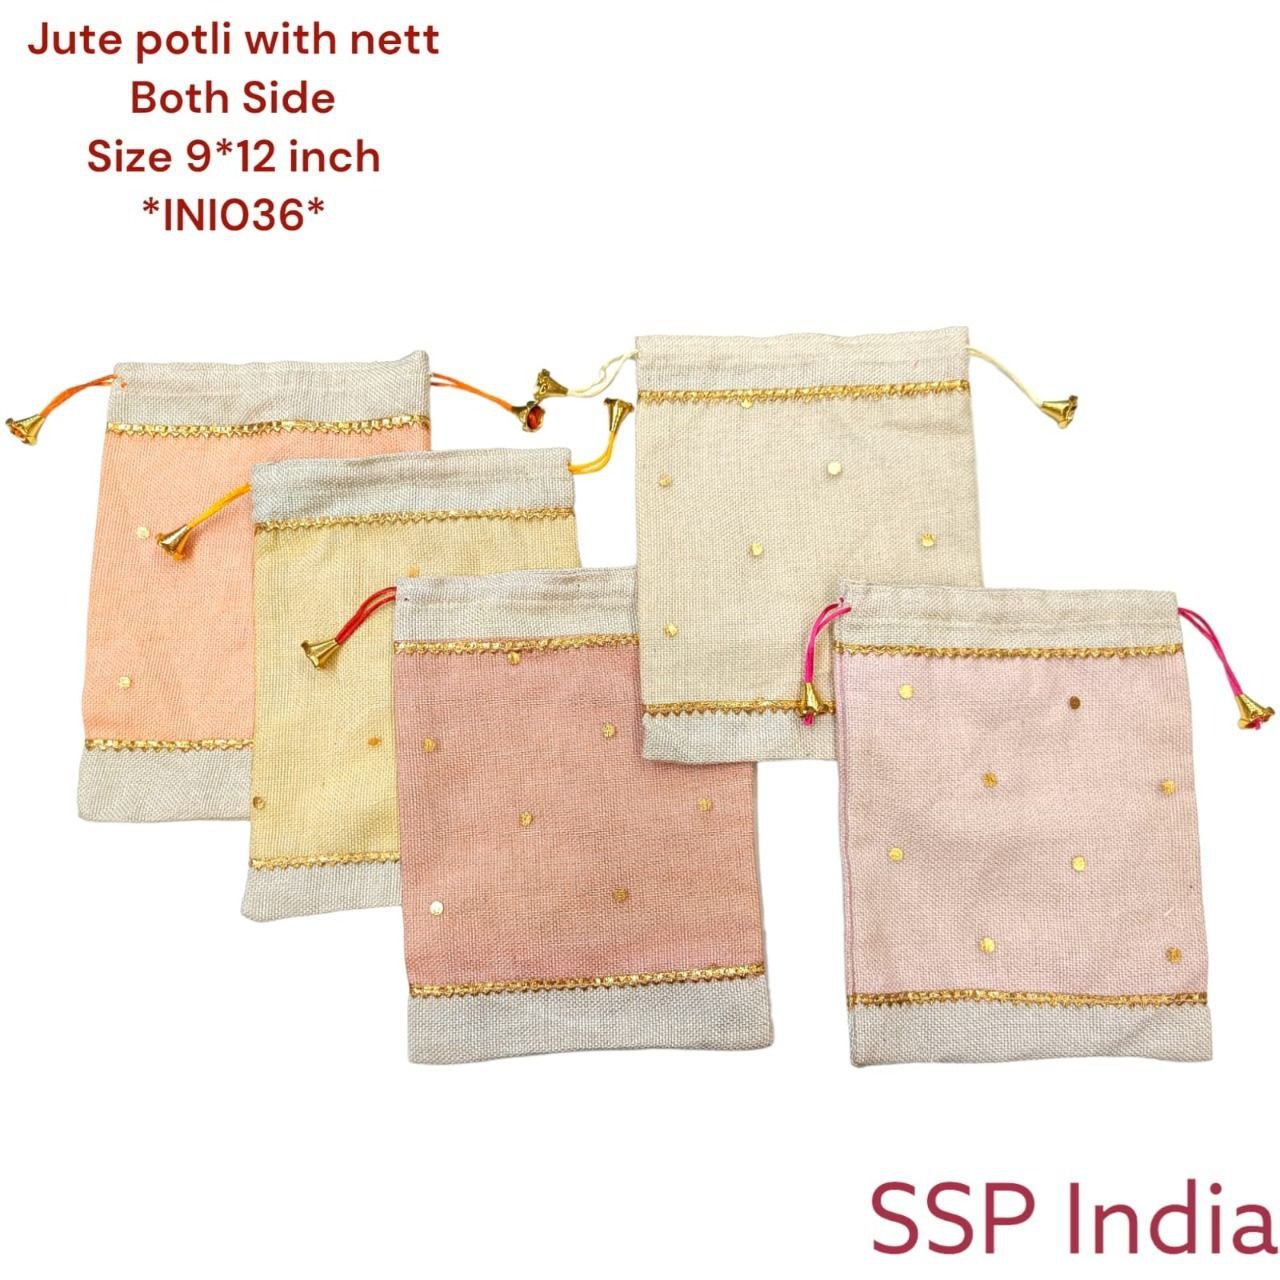 JUTE POTLI WITH POLKA NETTBOTH SIDE (36 pieces),OR, SSP